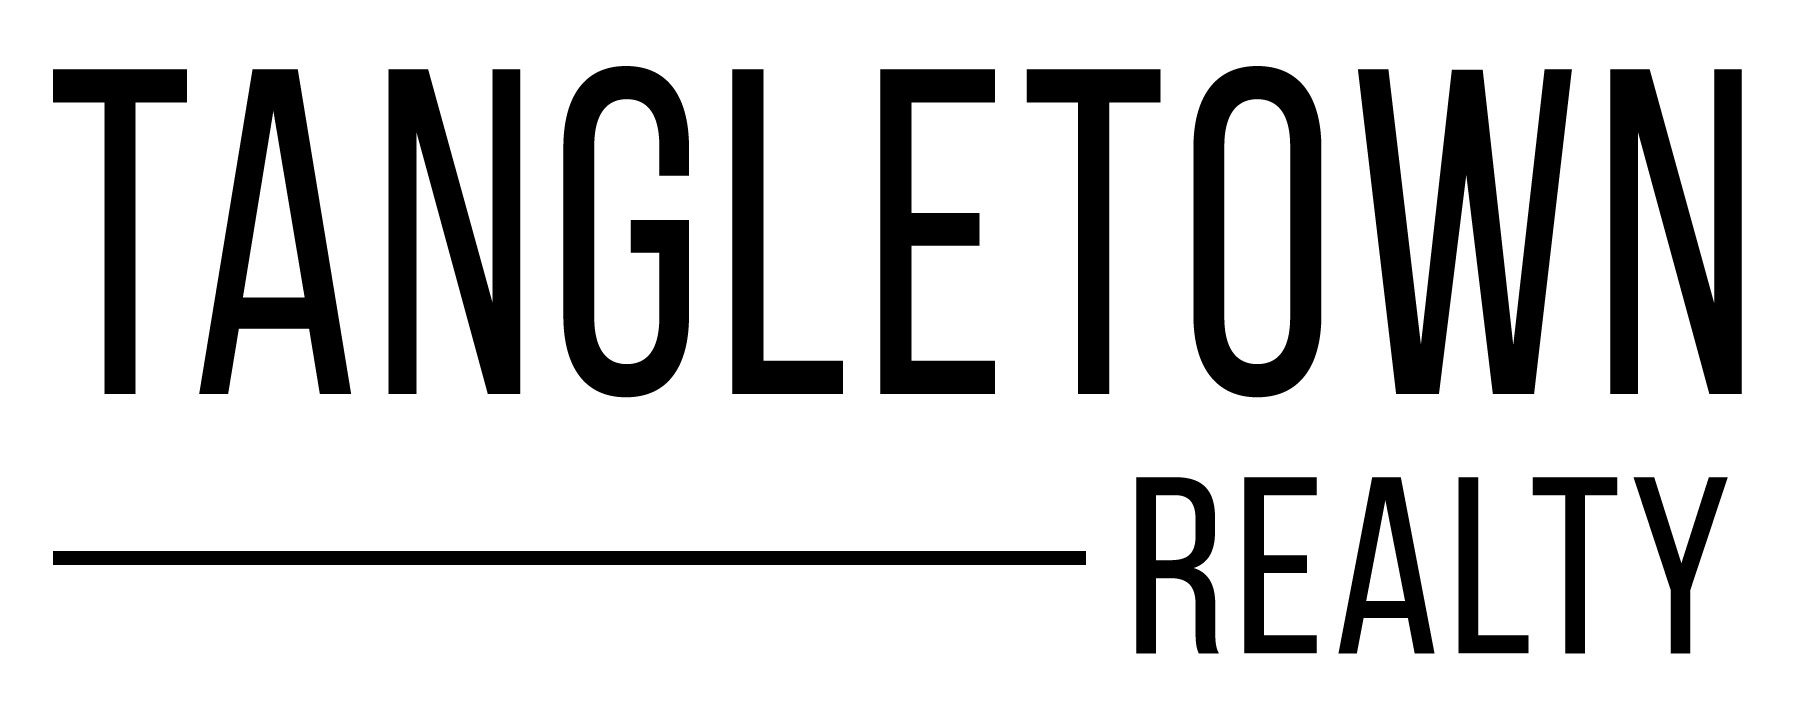 Tangletown Realty